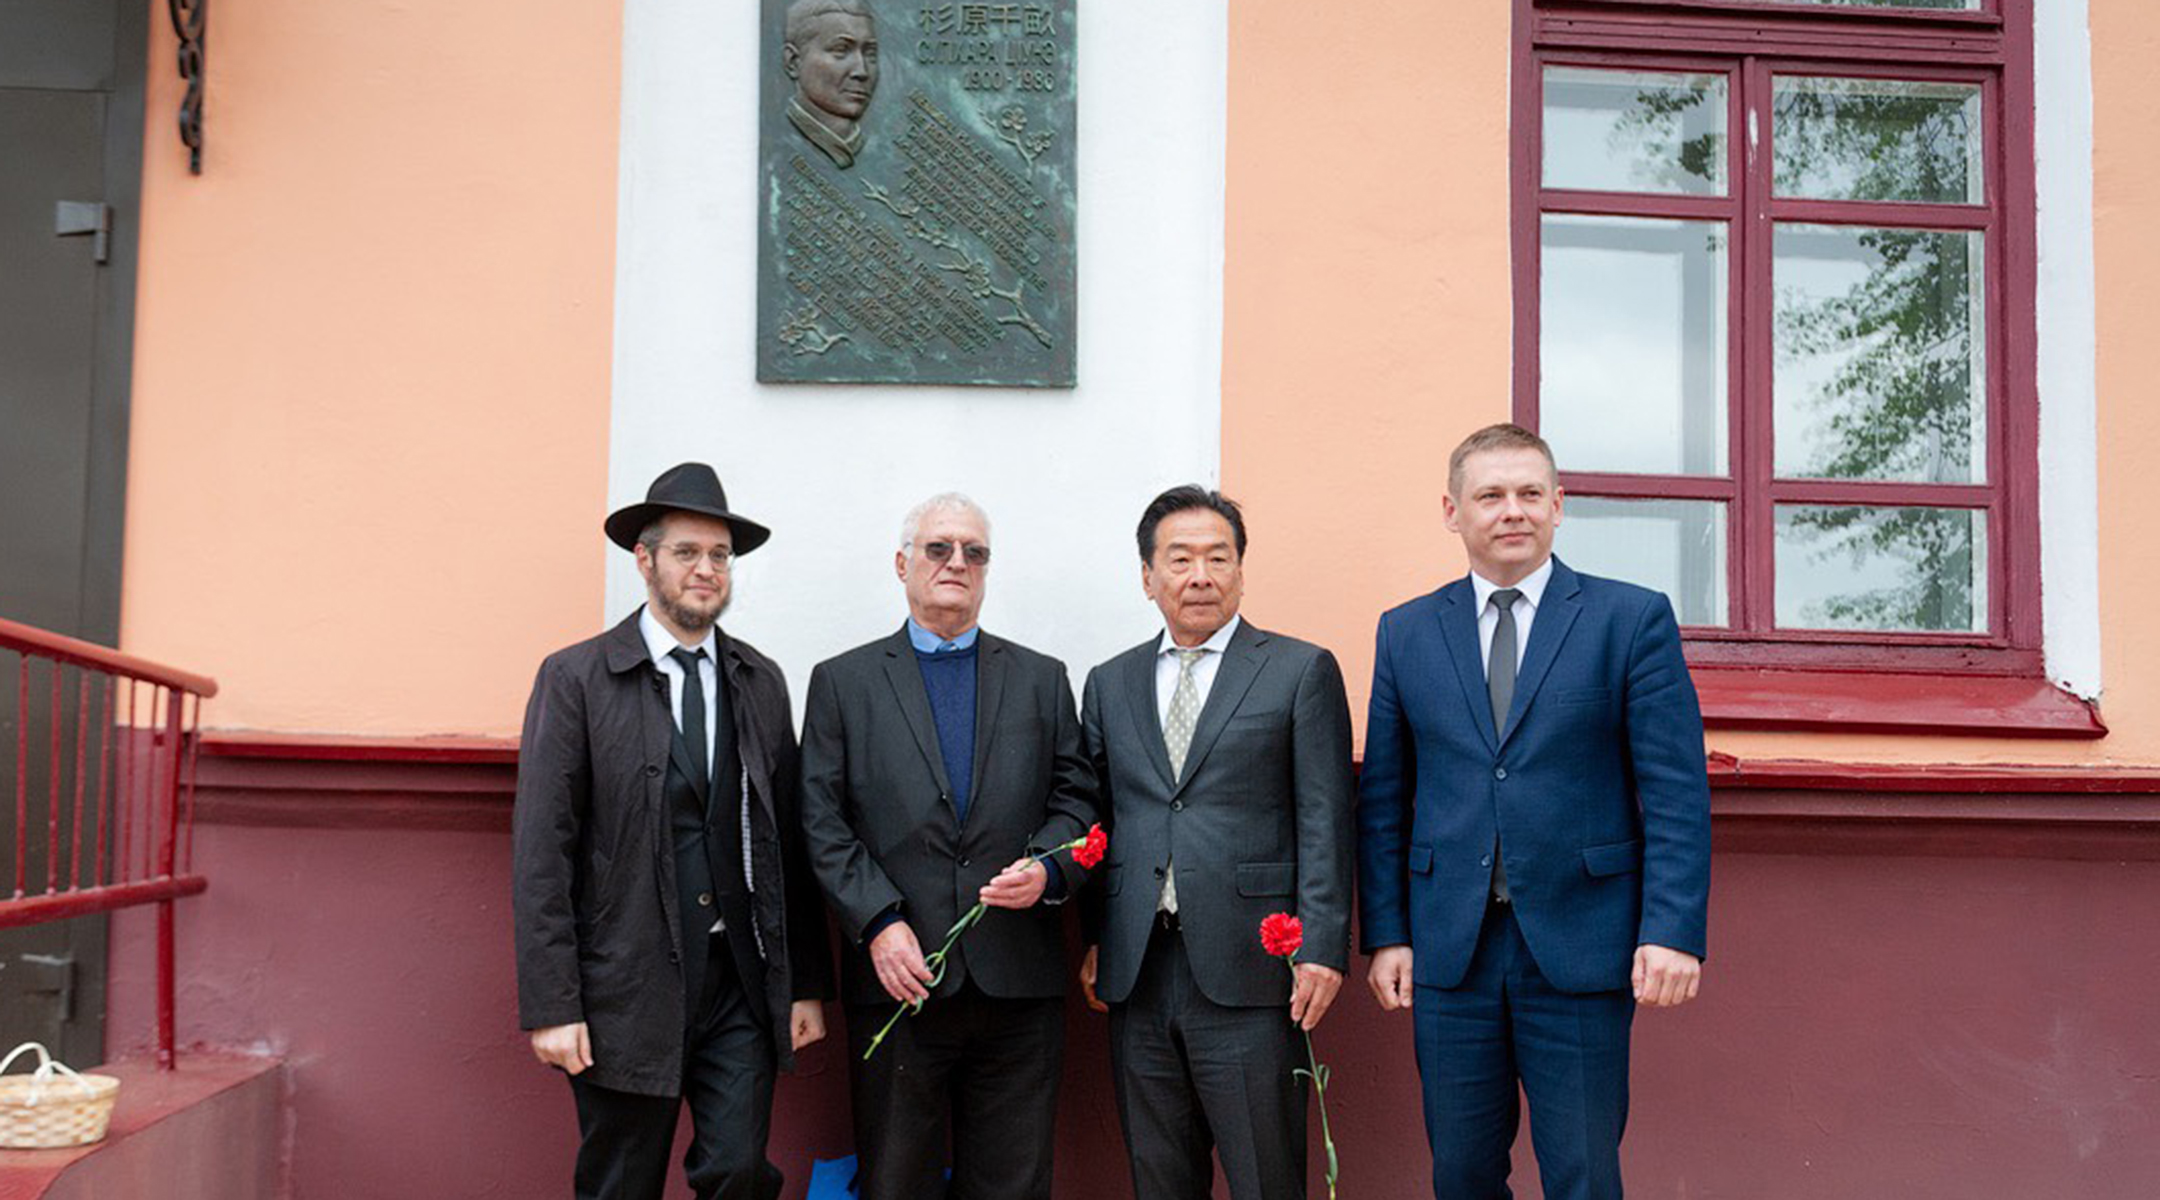 Nobuki Sugihara, second from left with Limmud FSU founder Chaim Chesler and villagers from Mir, Belarus on May 2, 2019. (Boris Brumin)